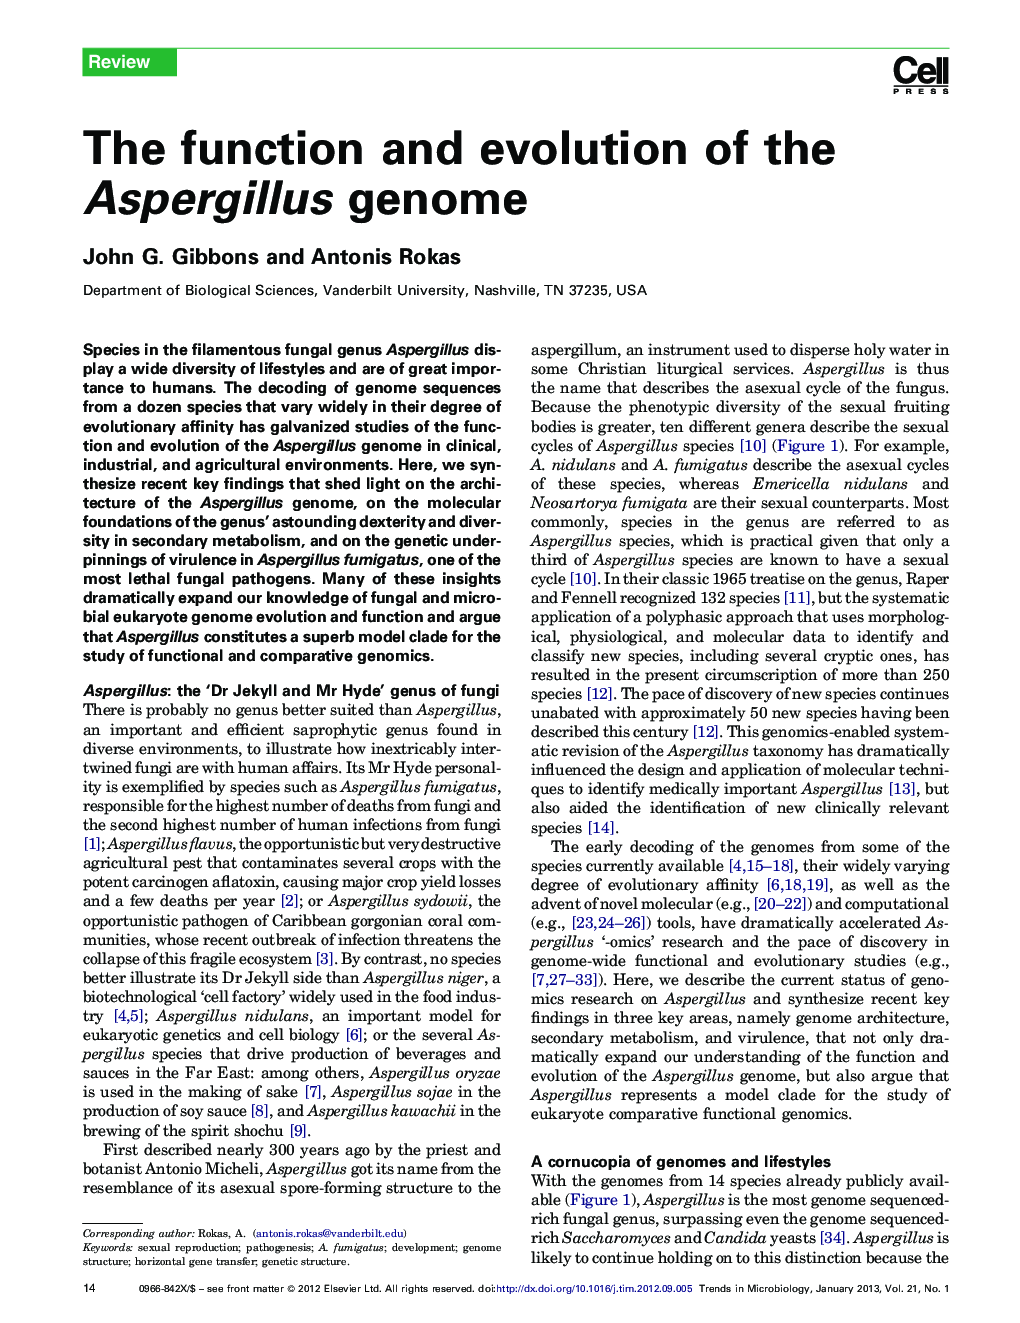 The function and evolution of the Aspergillus genome